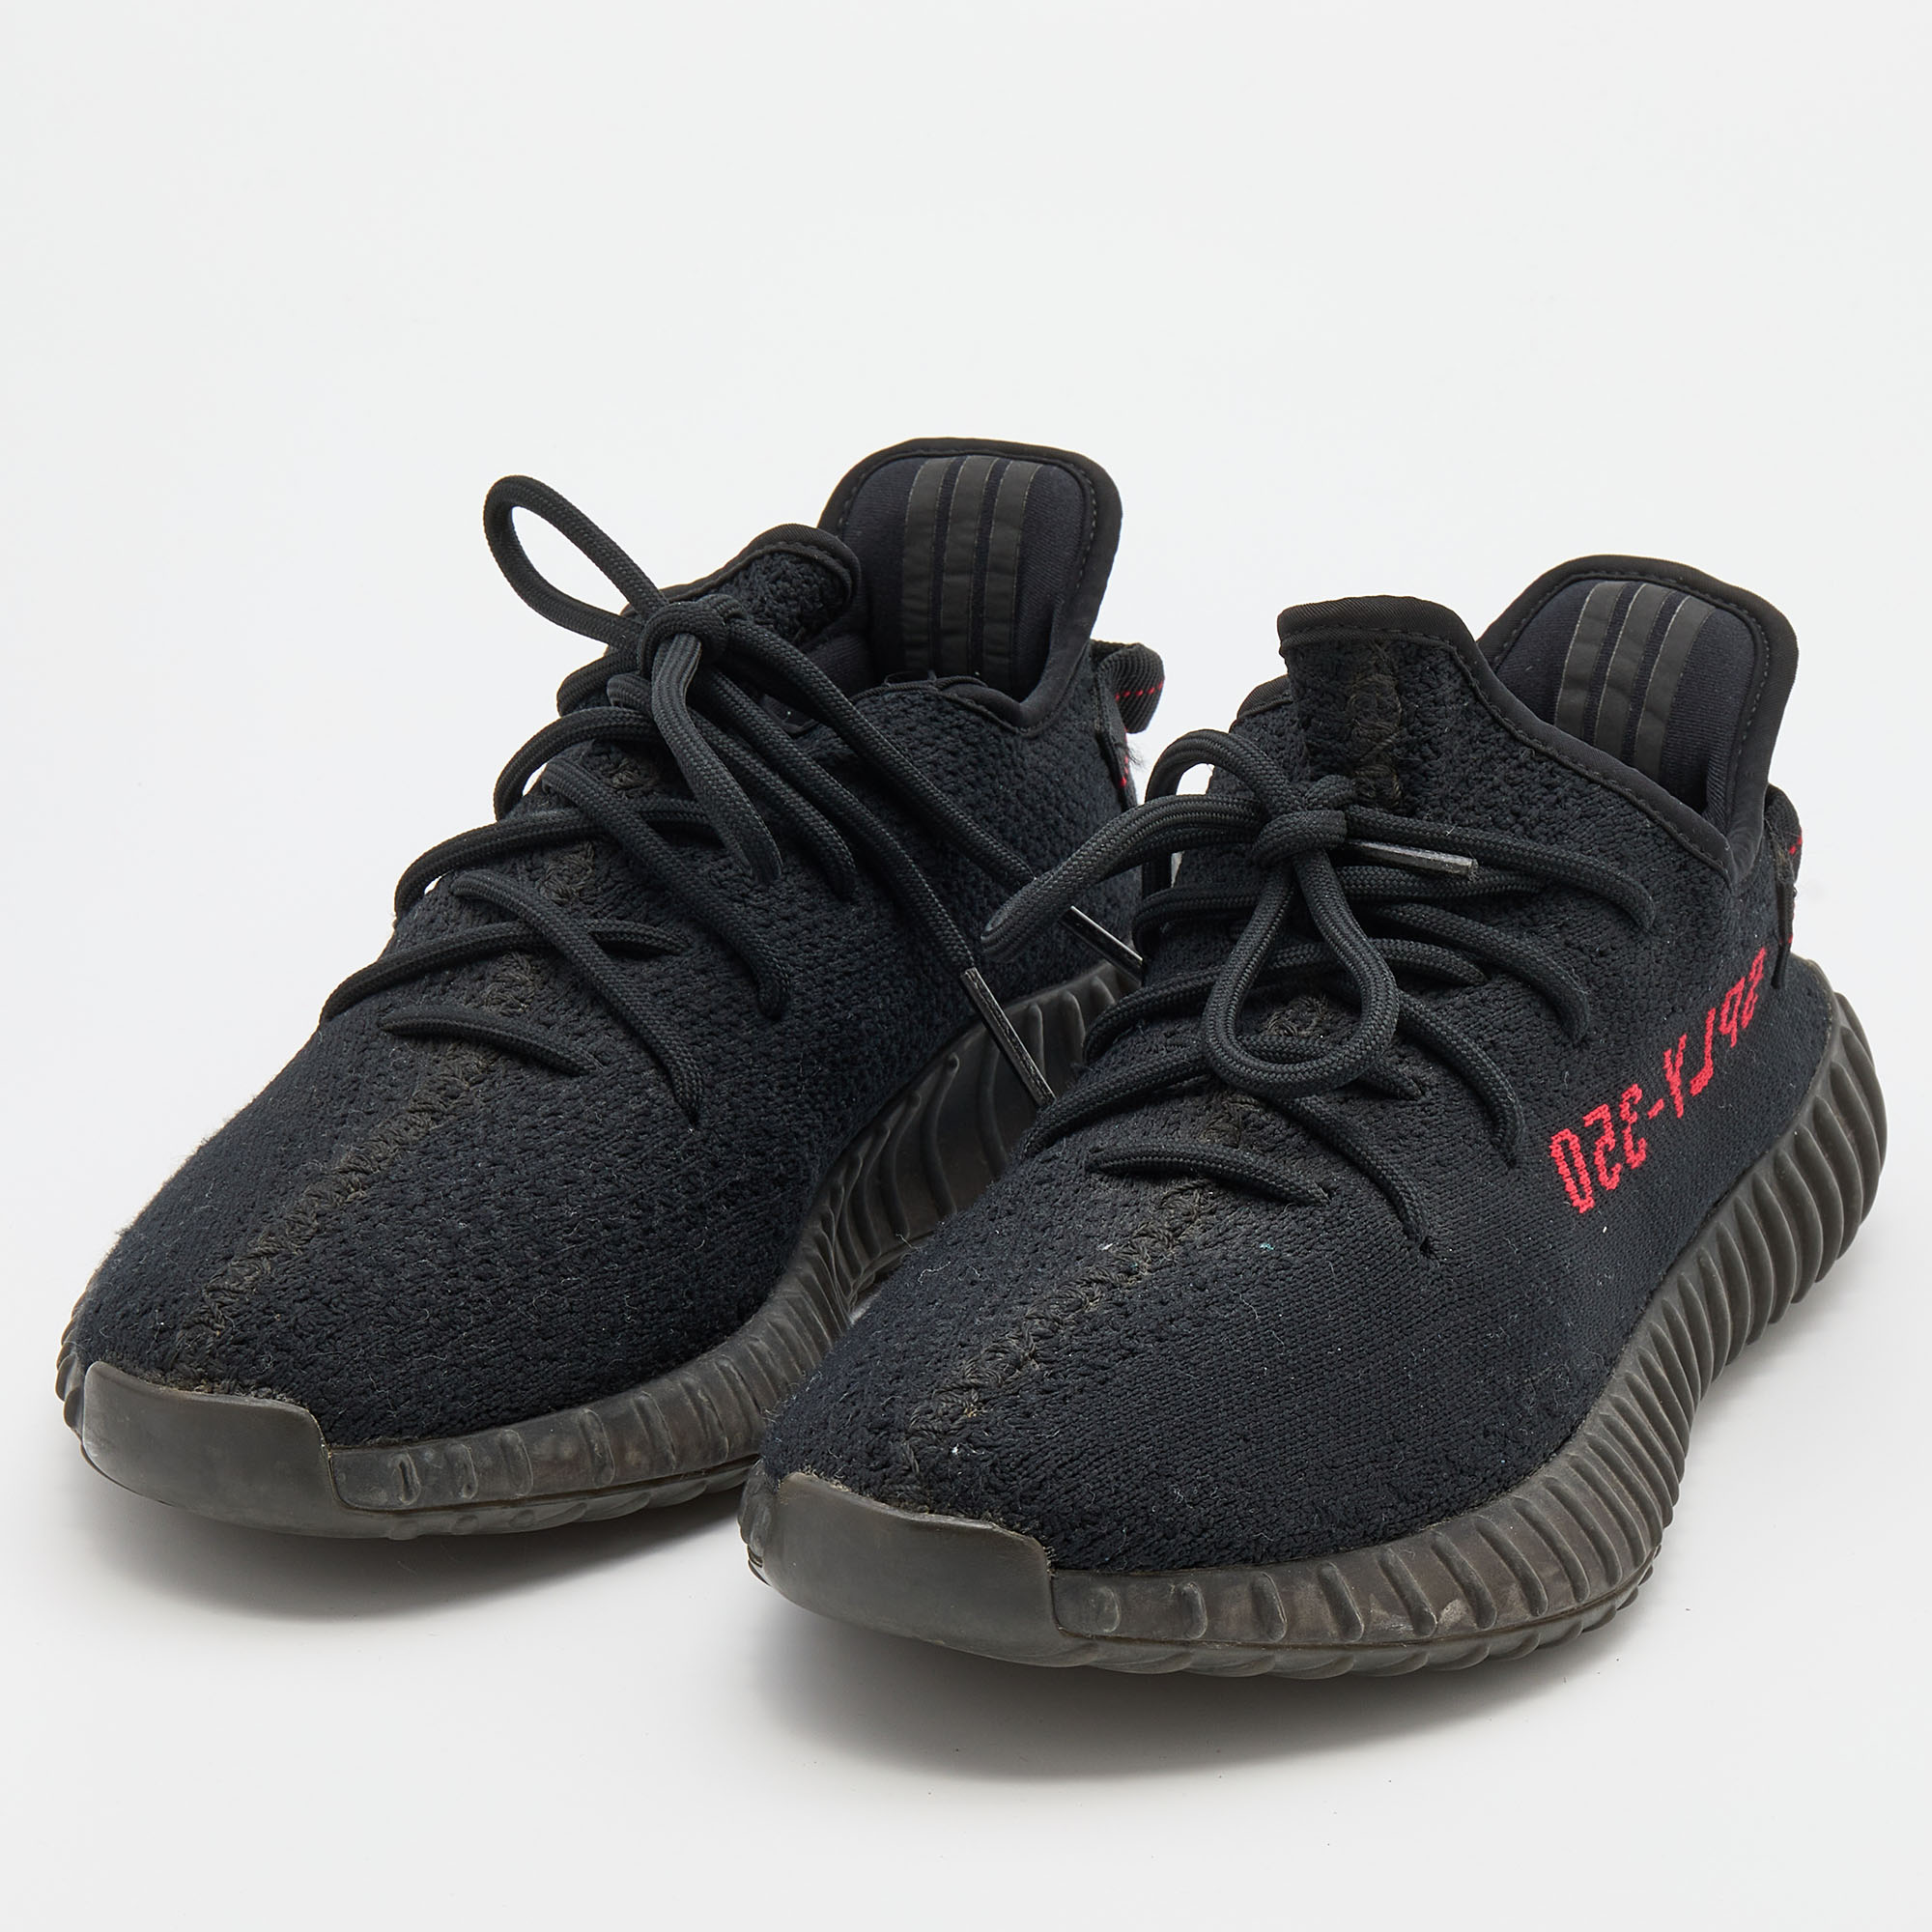 

Yeezy x Adidas Black/Red Knit Fabric Boost 350 V2 Bred Sneakers Size